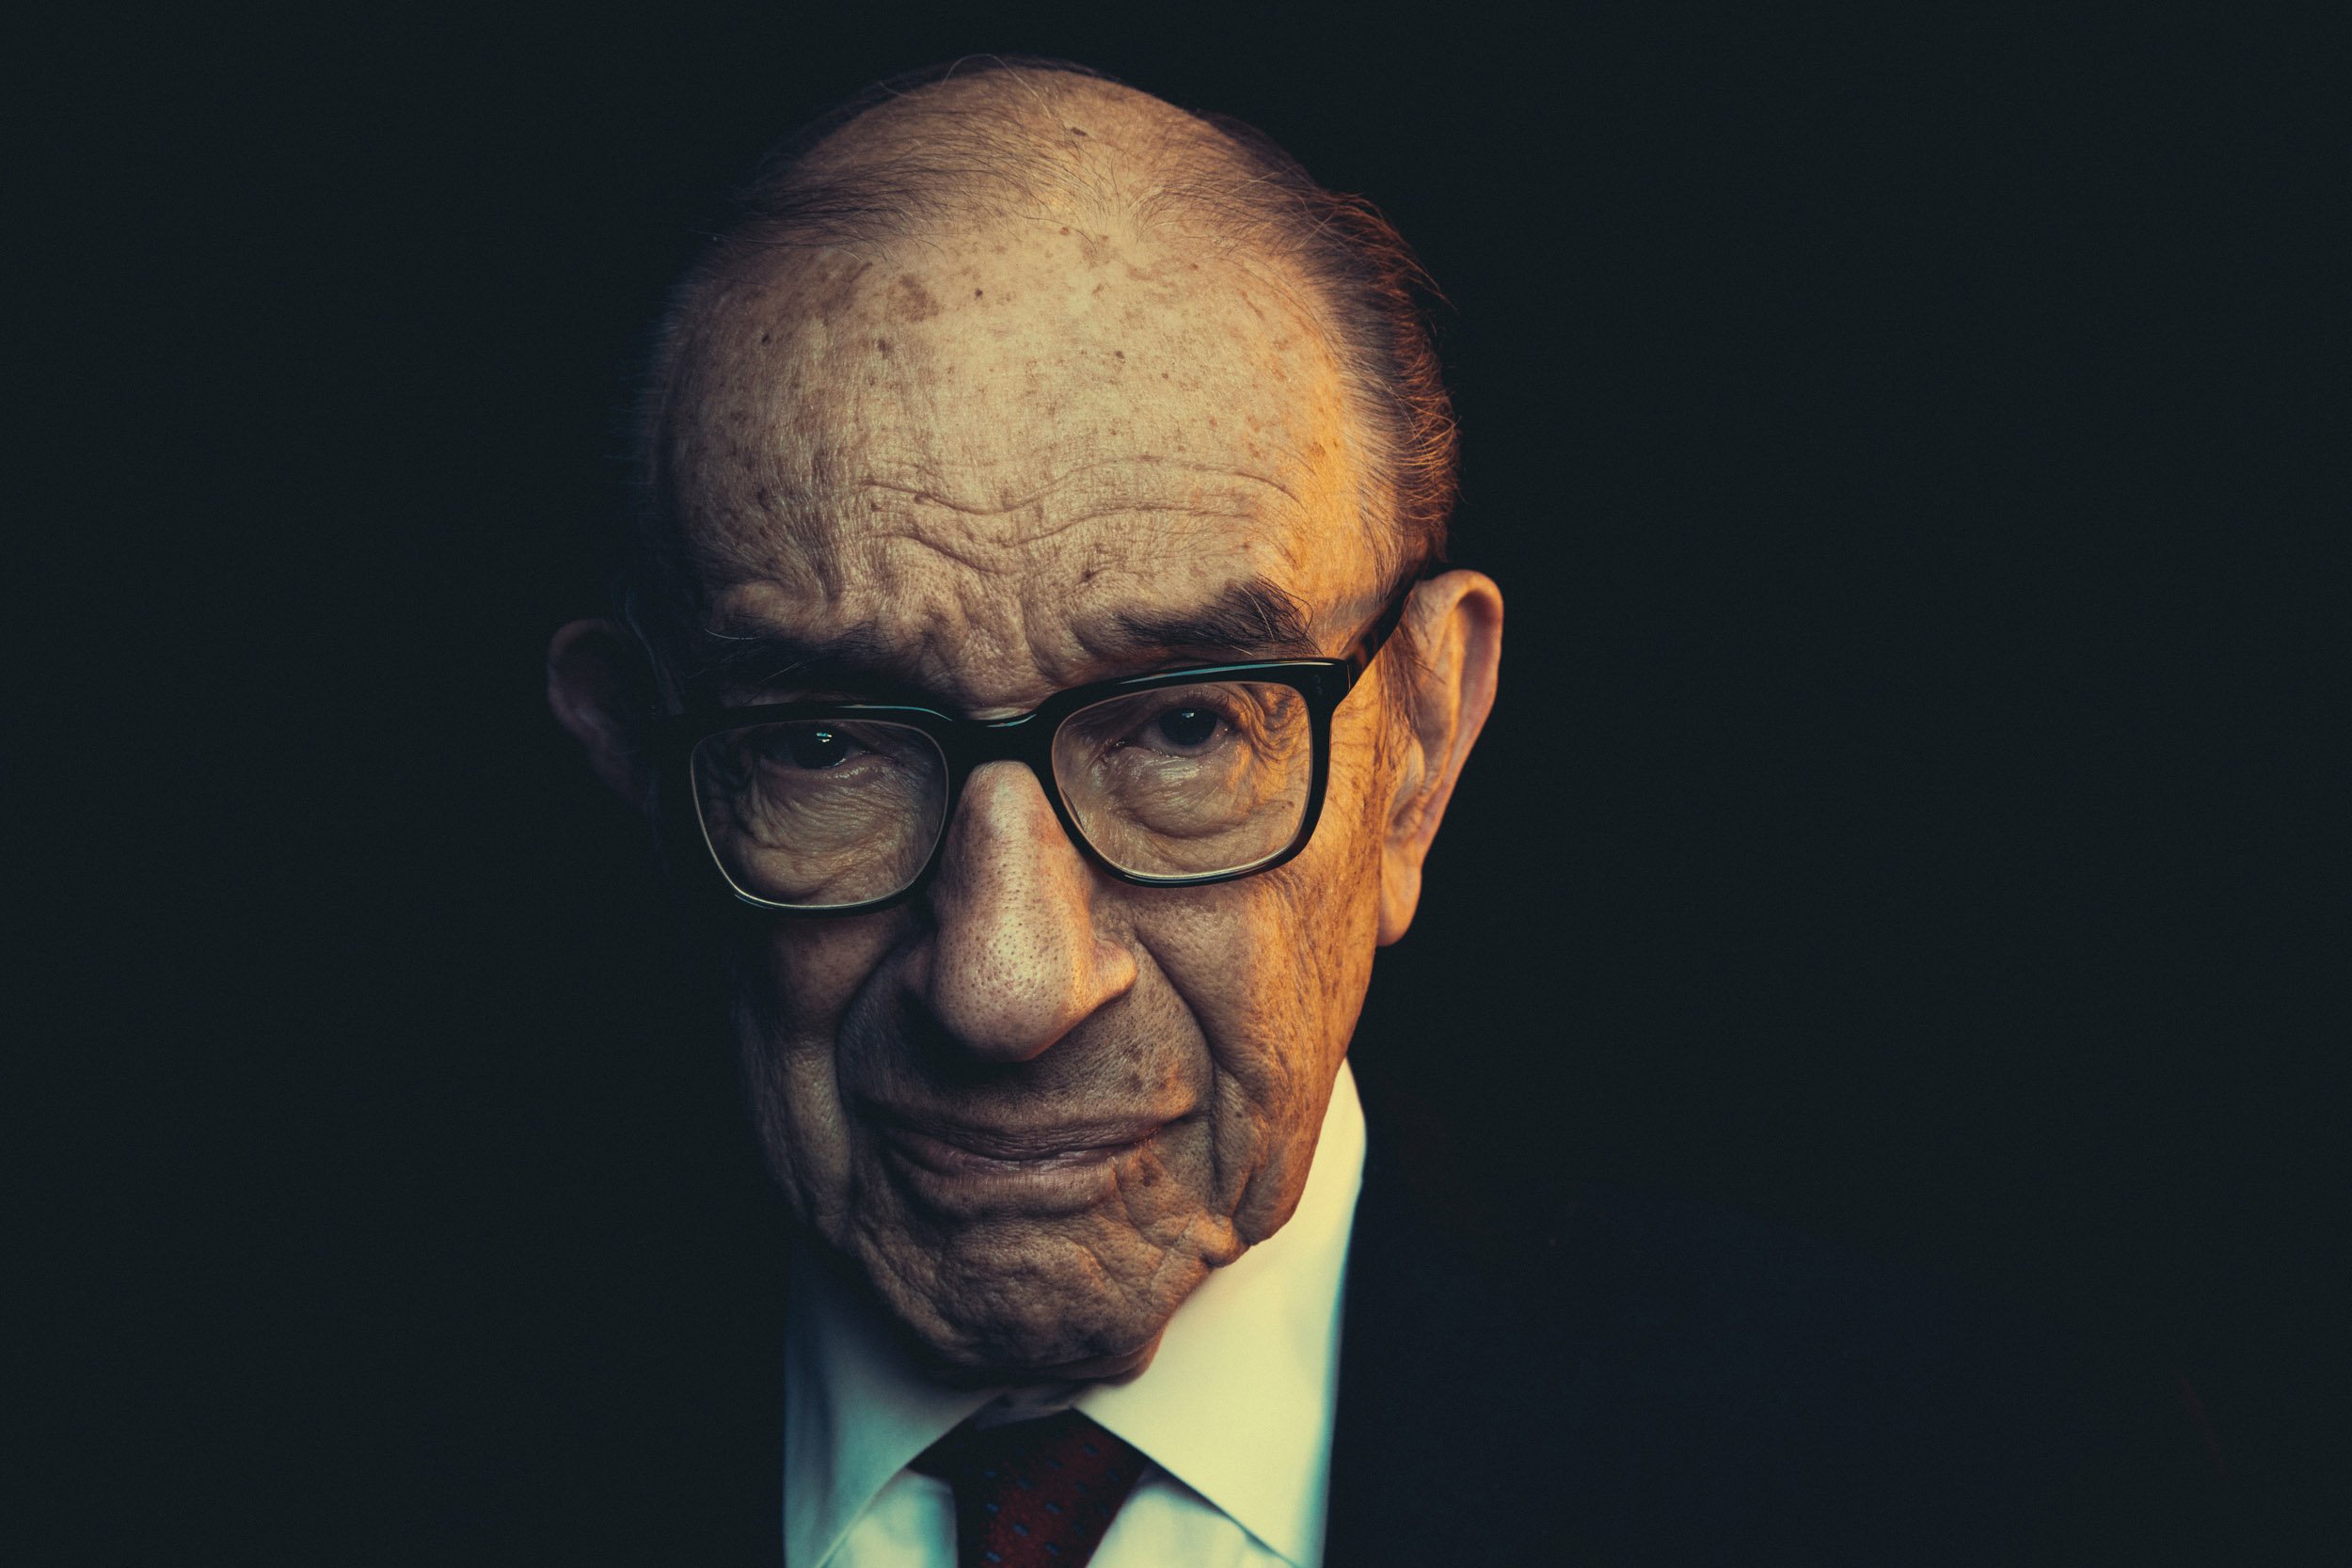 Former Chairman of the Federal Reserve Alan Greenspan